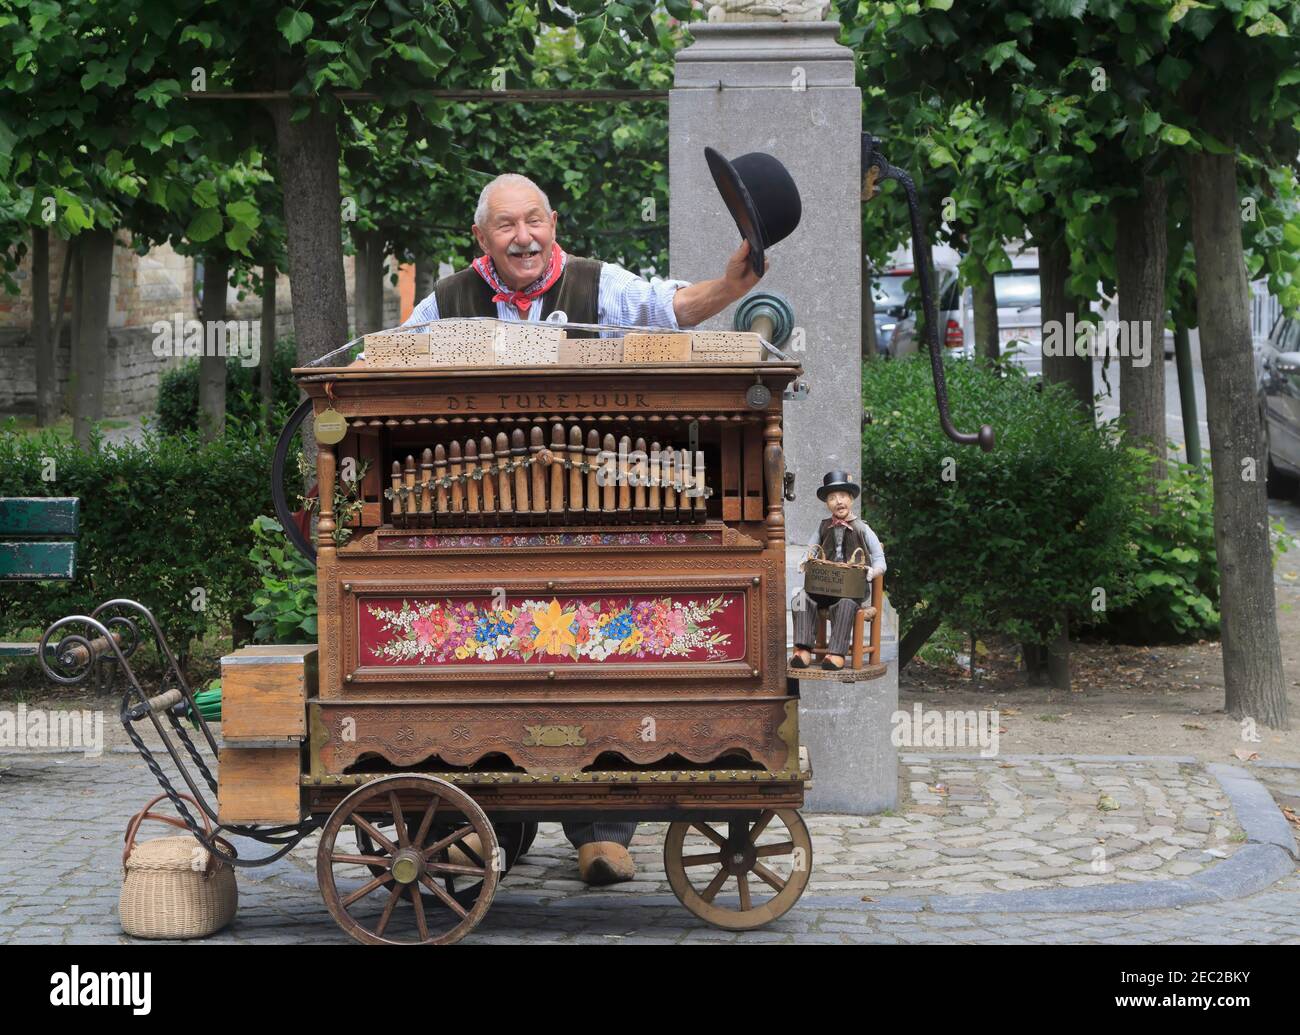 Street entertainer in Bruges, Belgium. Elderly gentleman performs for tourists with an old fashioned barrel organ. Stock Photo